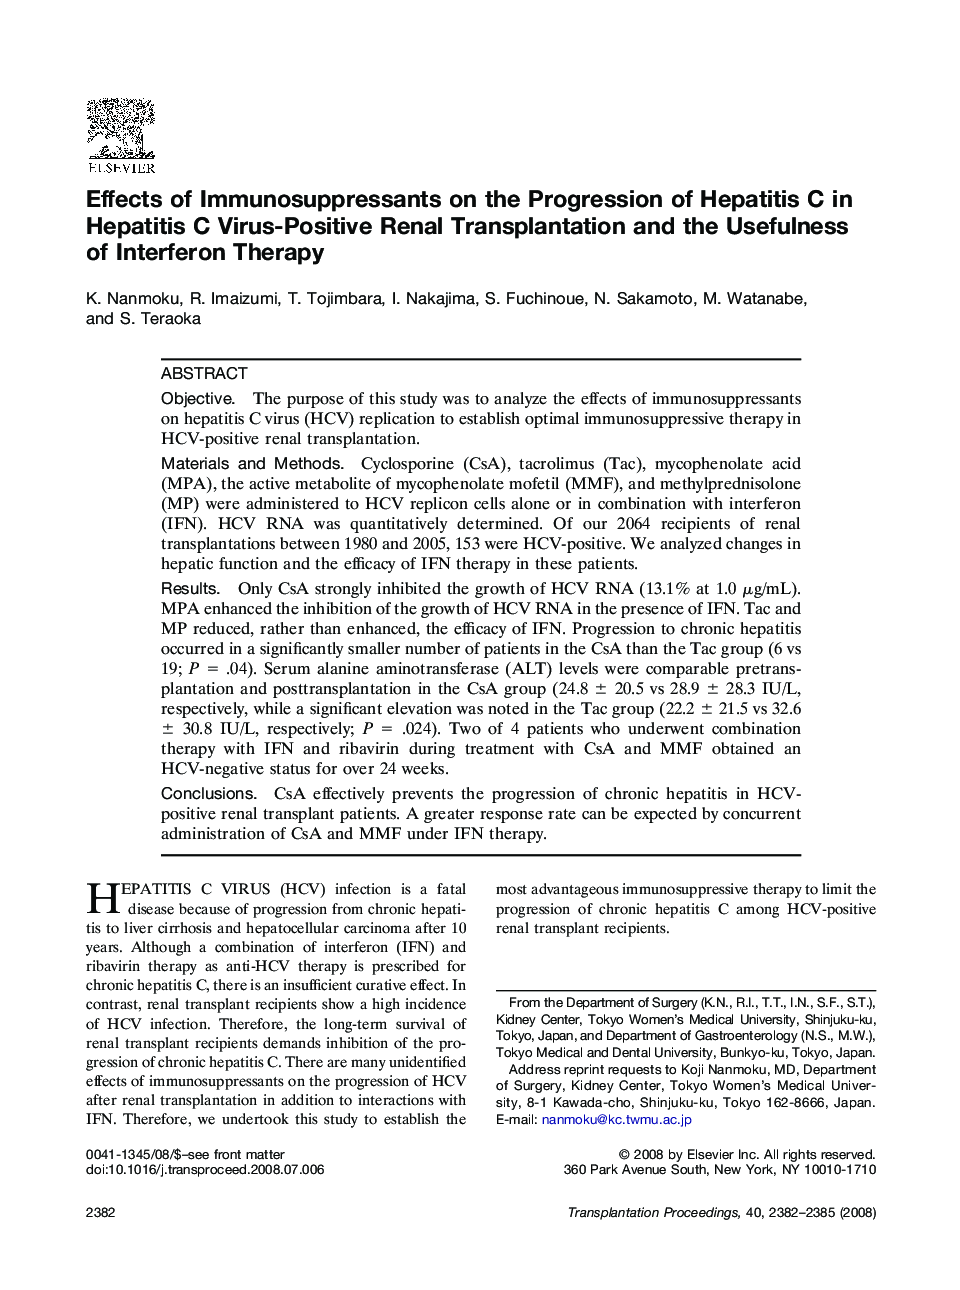 Effects of Immunosuppressants on the Progression of Hepatitis C in Hepatitis C Virus-Positive Renal Transplantation and the Usefulness of Interferon Therapy